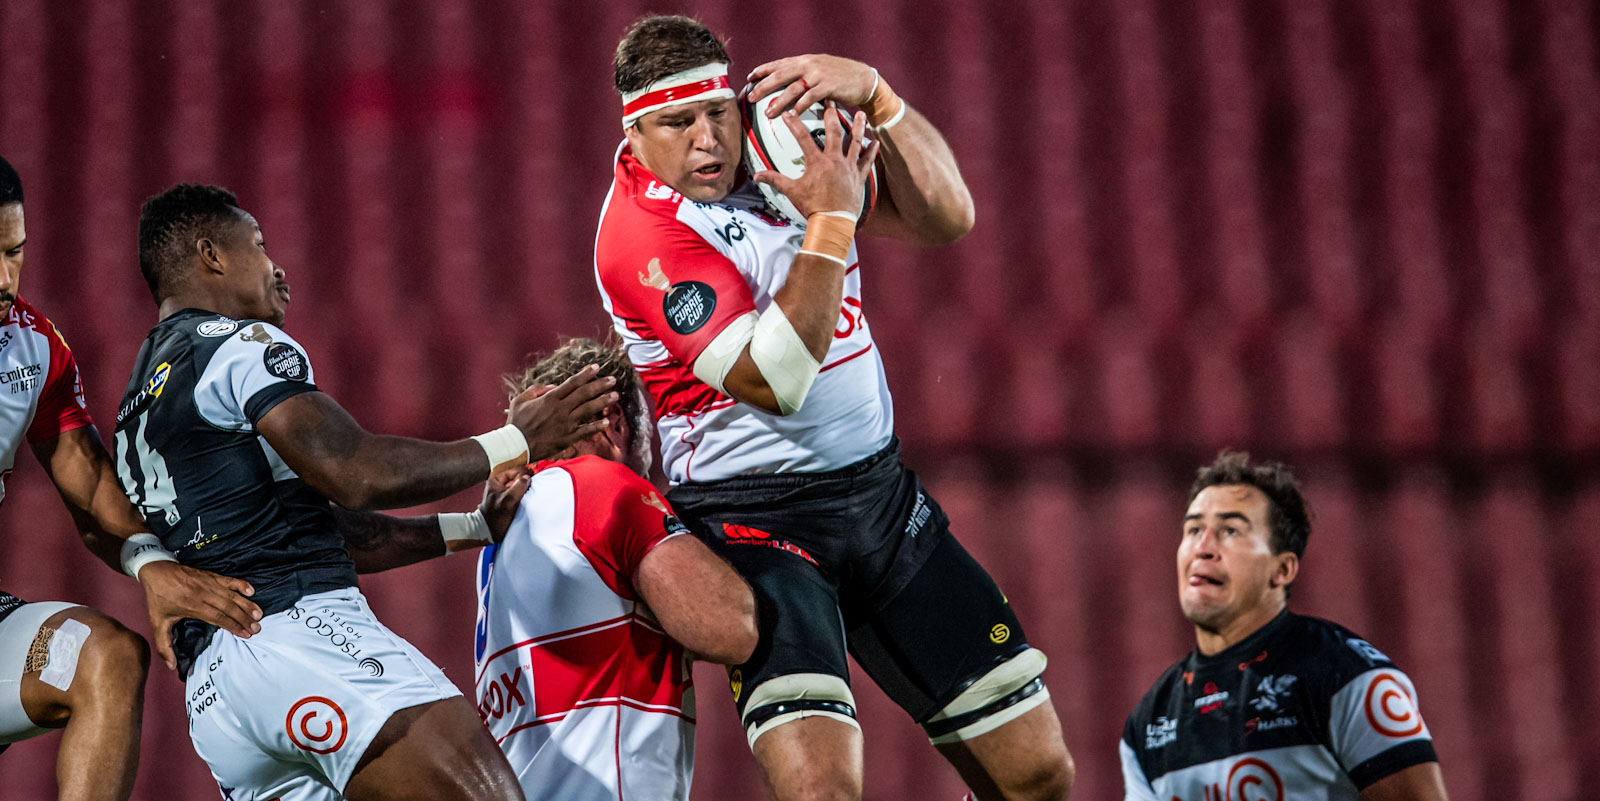 Willem Alberts was Man of the Match on the back of a strong defensive effort